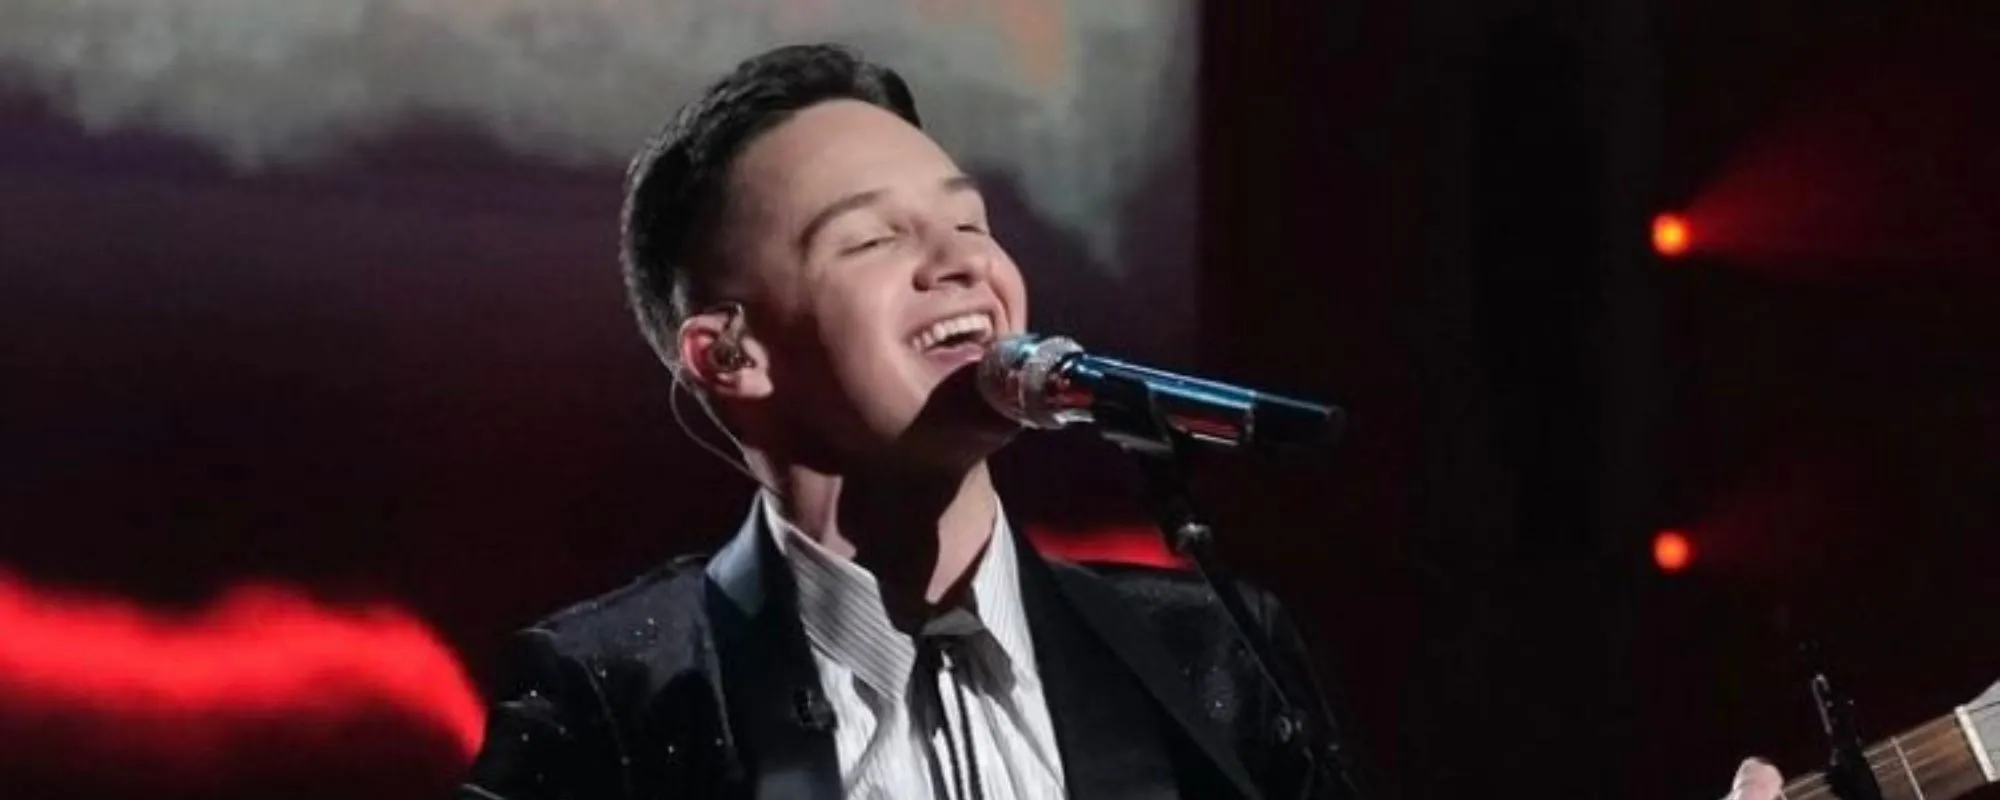 American Idol Finalist Jack Blocker Proves He’s a “Rockstar in the Making” With Showstopping Bon Jovi Cover